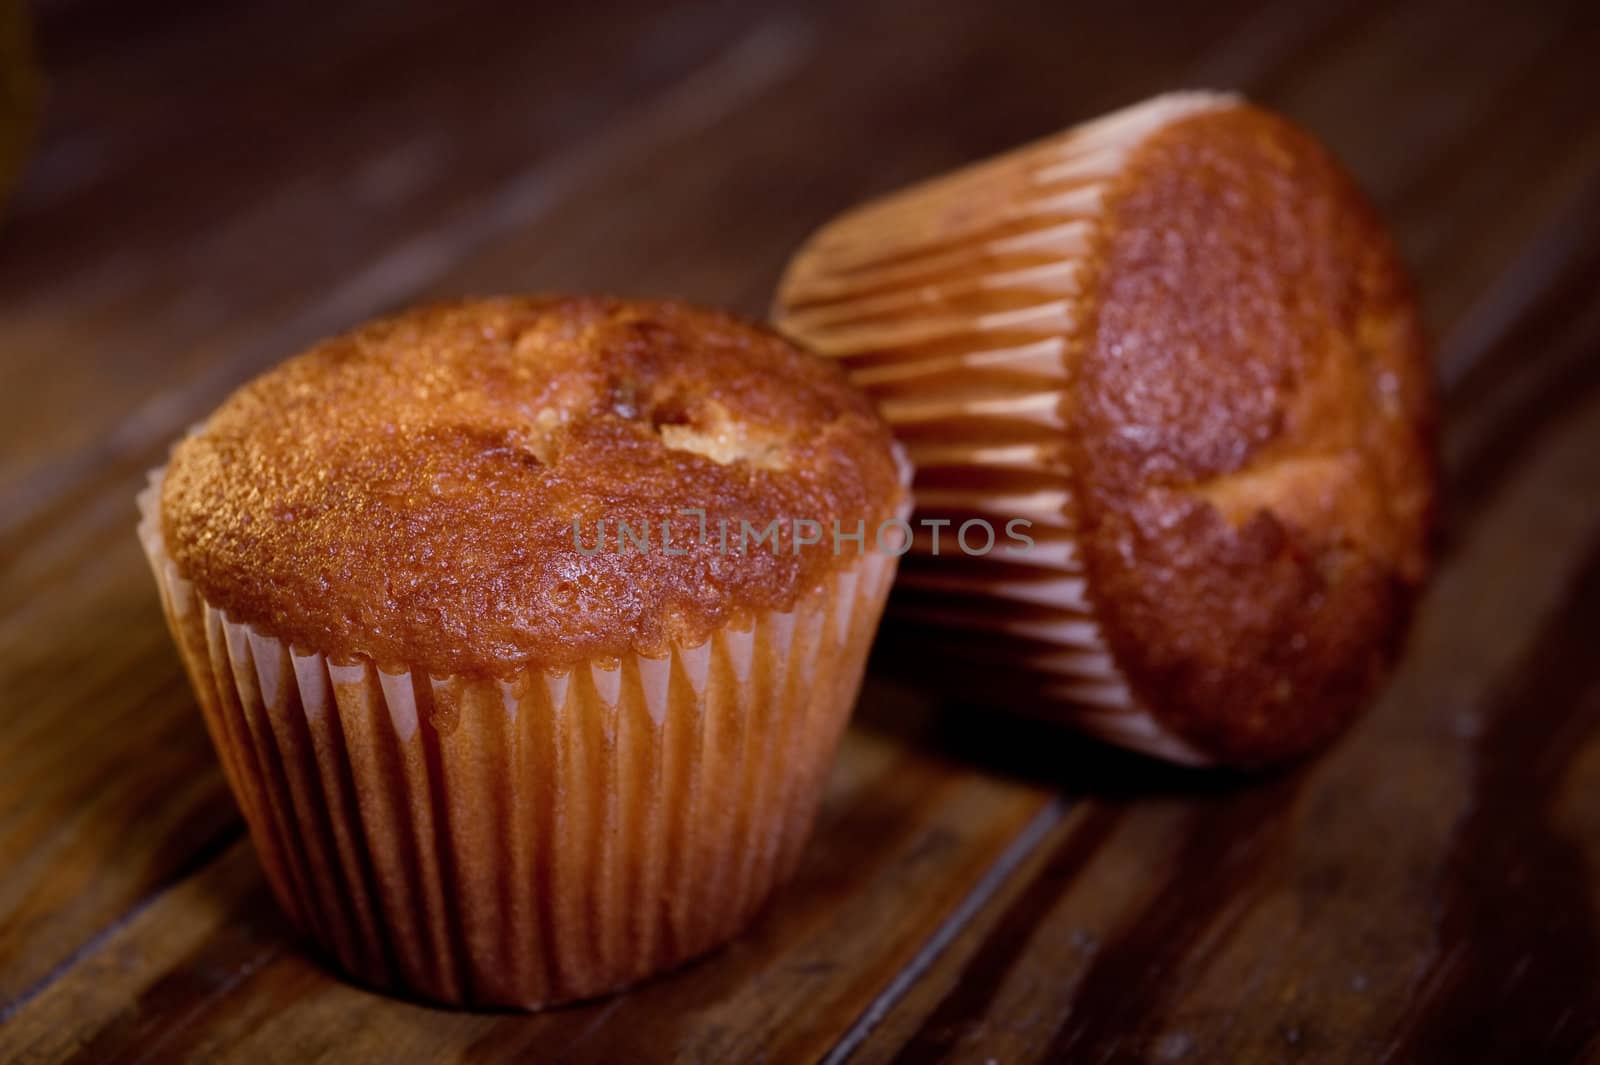 Two muffins on wooden table, close up, studio shot.